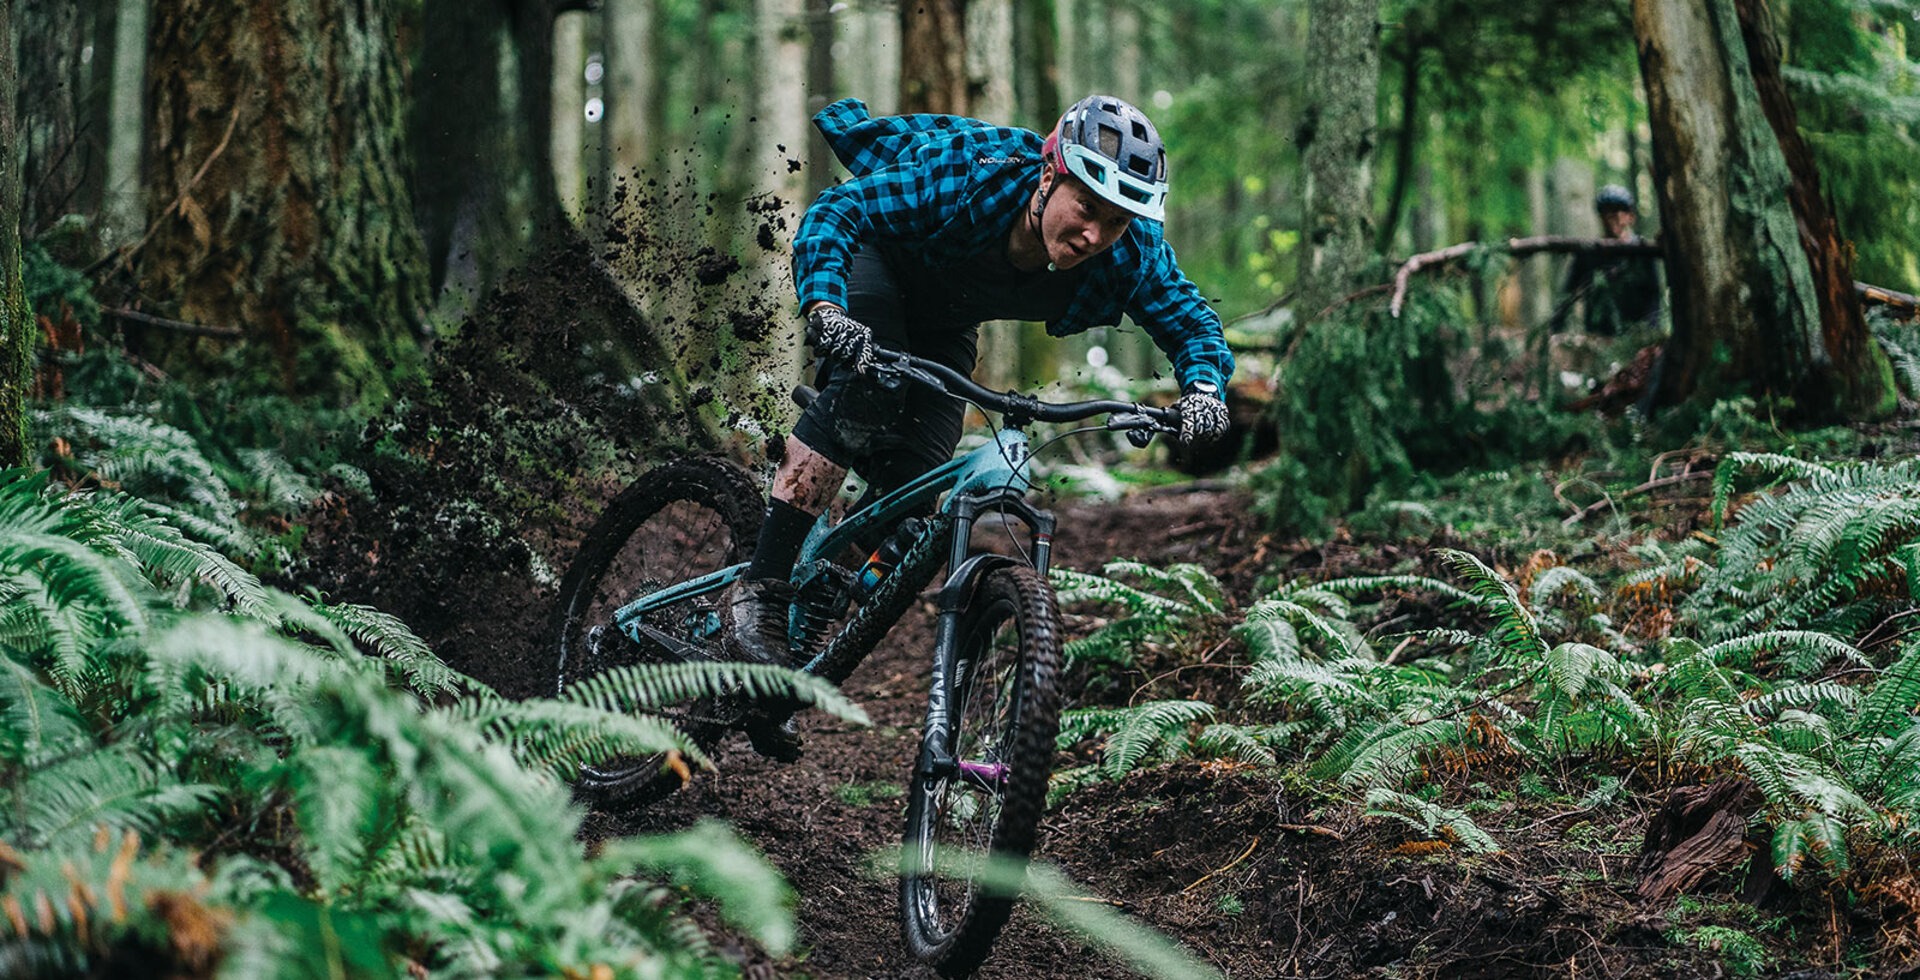 With dirt like this and a family focused on playing in it, perhaps it was inevitable that Hannah Bergemann would become such a phenomenal talent. Photo: Skye Schillhammer | SONY, 1/800 sec, f/2, ISO 2000